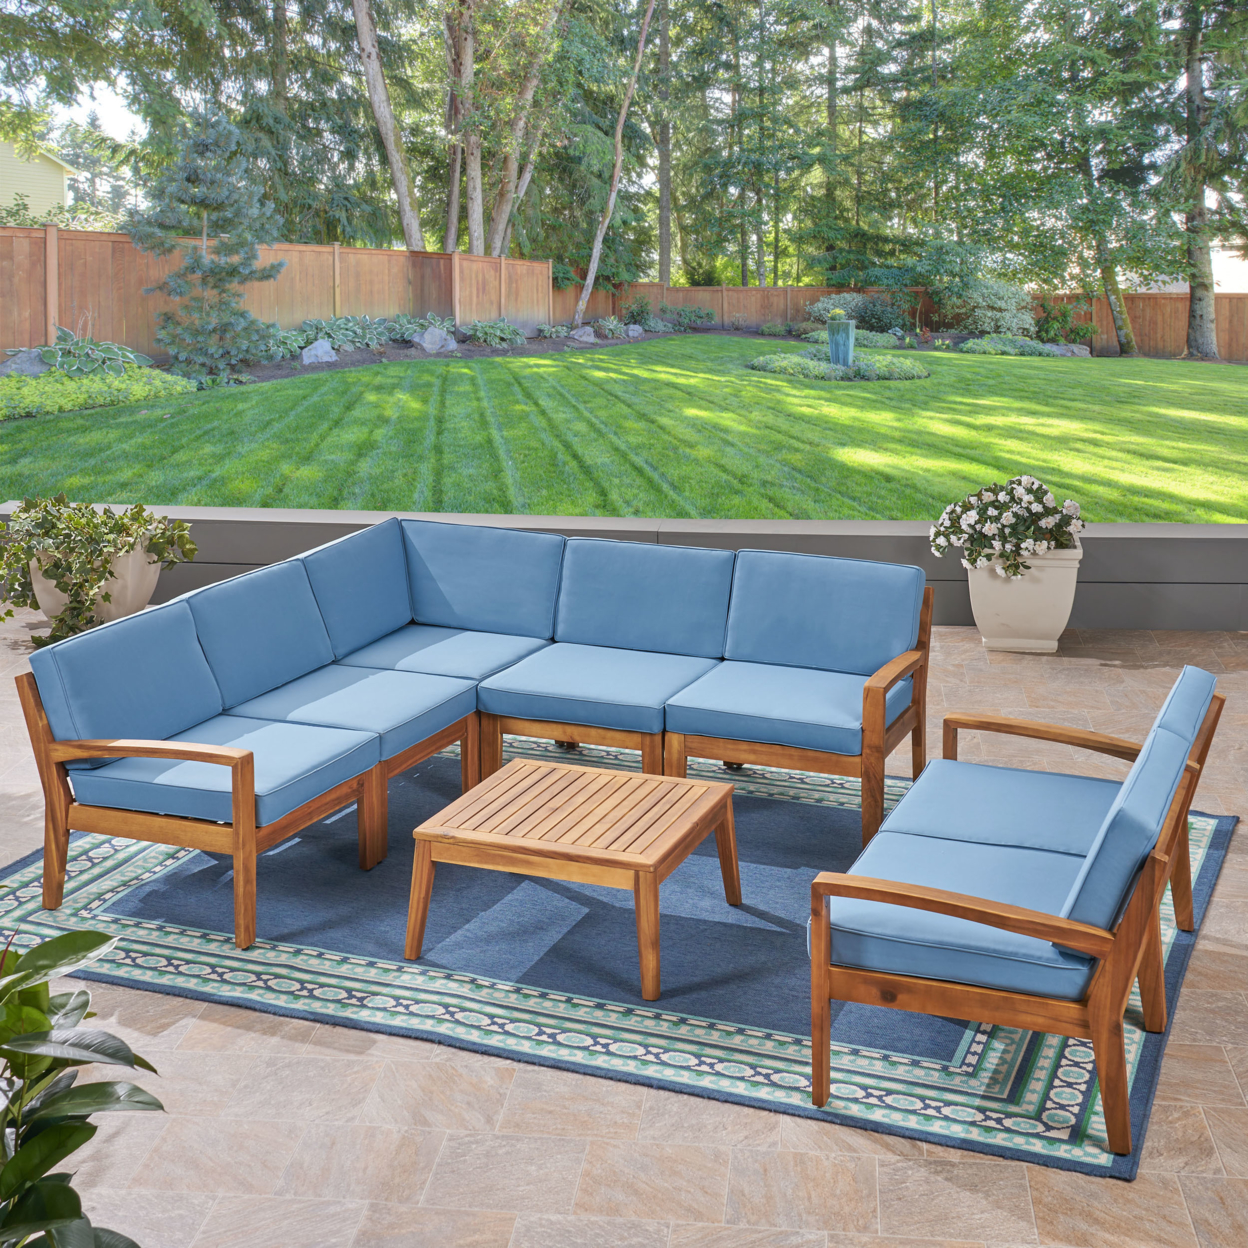 Amaryllis Outdoor Acacia Wood 7 Seater Sectional Sofa And Loveseat Set With Coffee Table - Blue